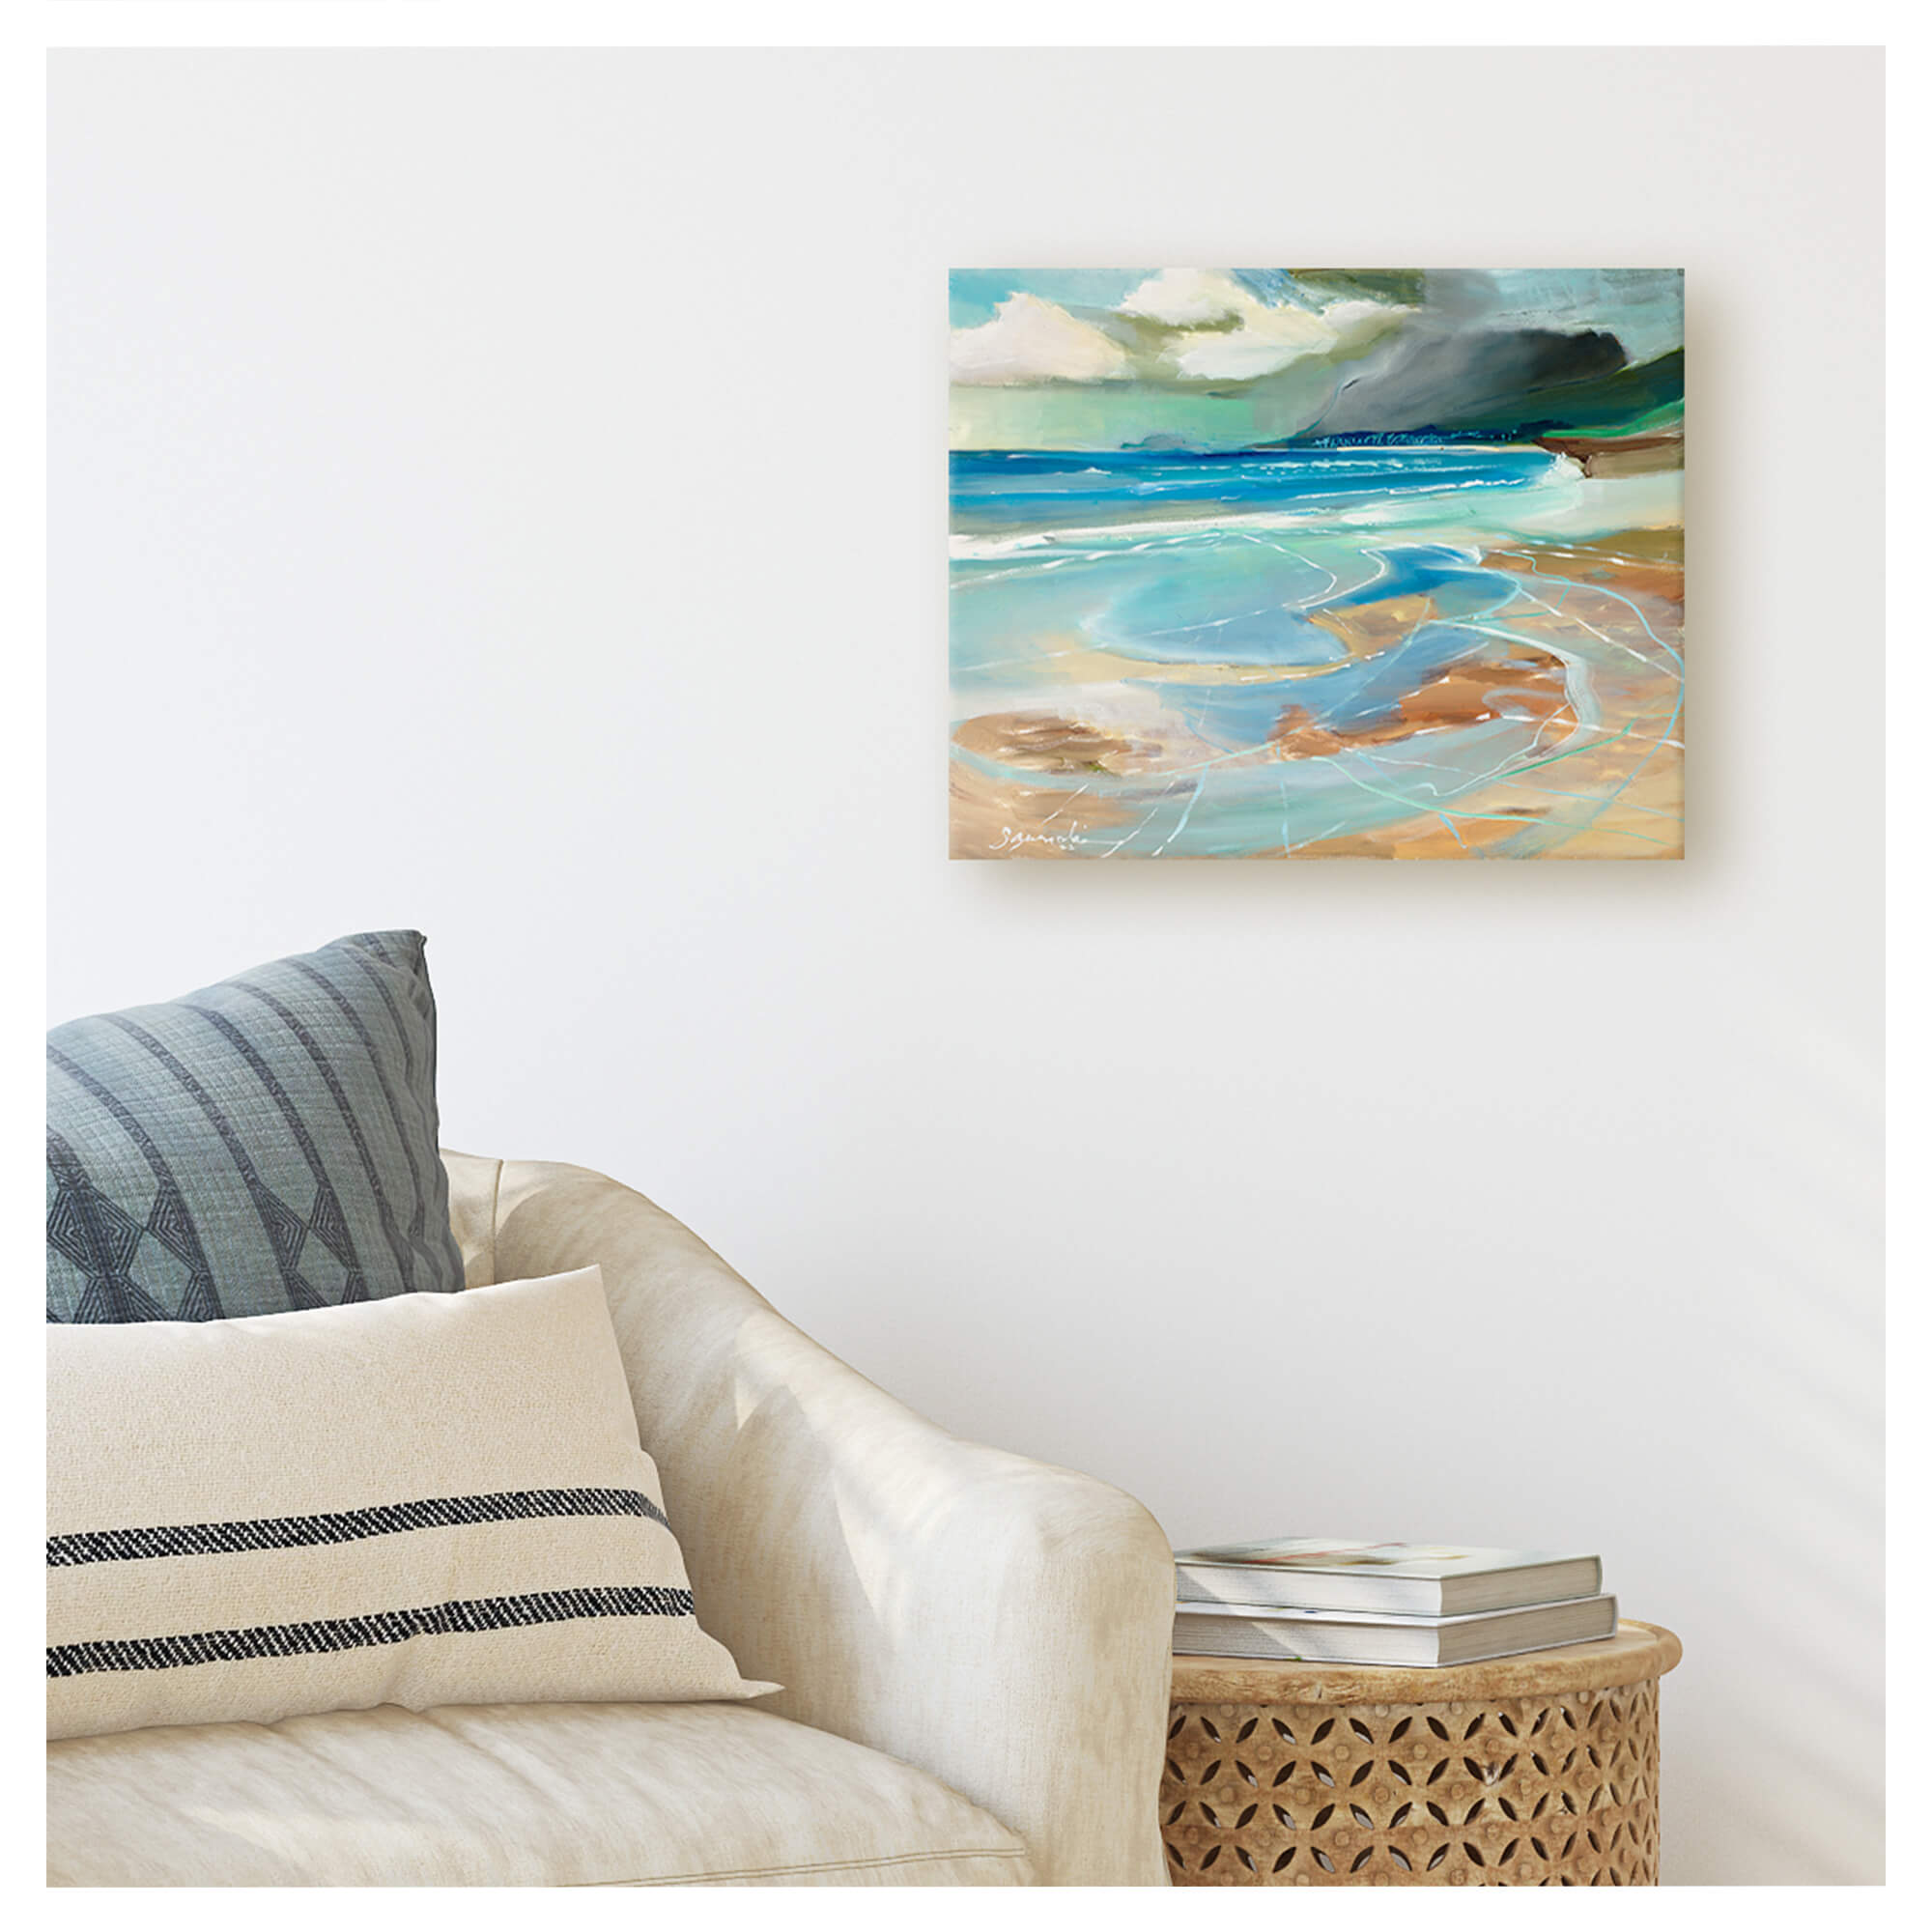 A wall art of an original painting featuring an abstract serene seascape of Laie Beach using oil on canvas by famous Hawaii artist Saumolia Puapuaga